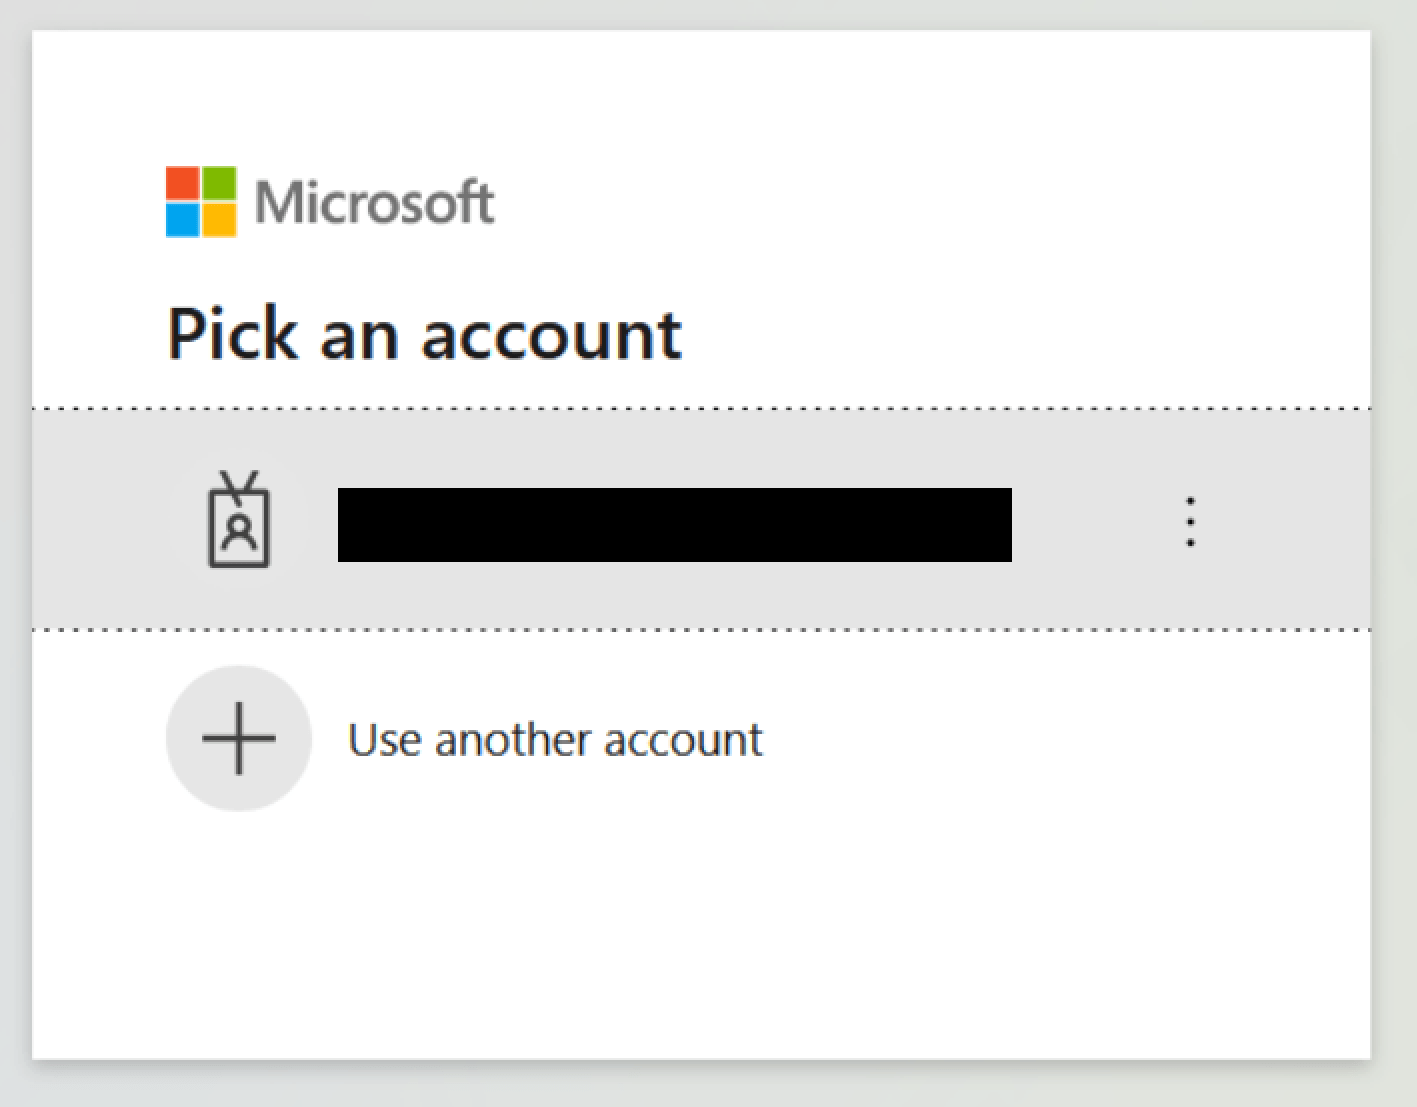 Re-log in to your account on desktop